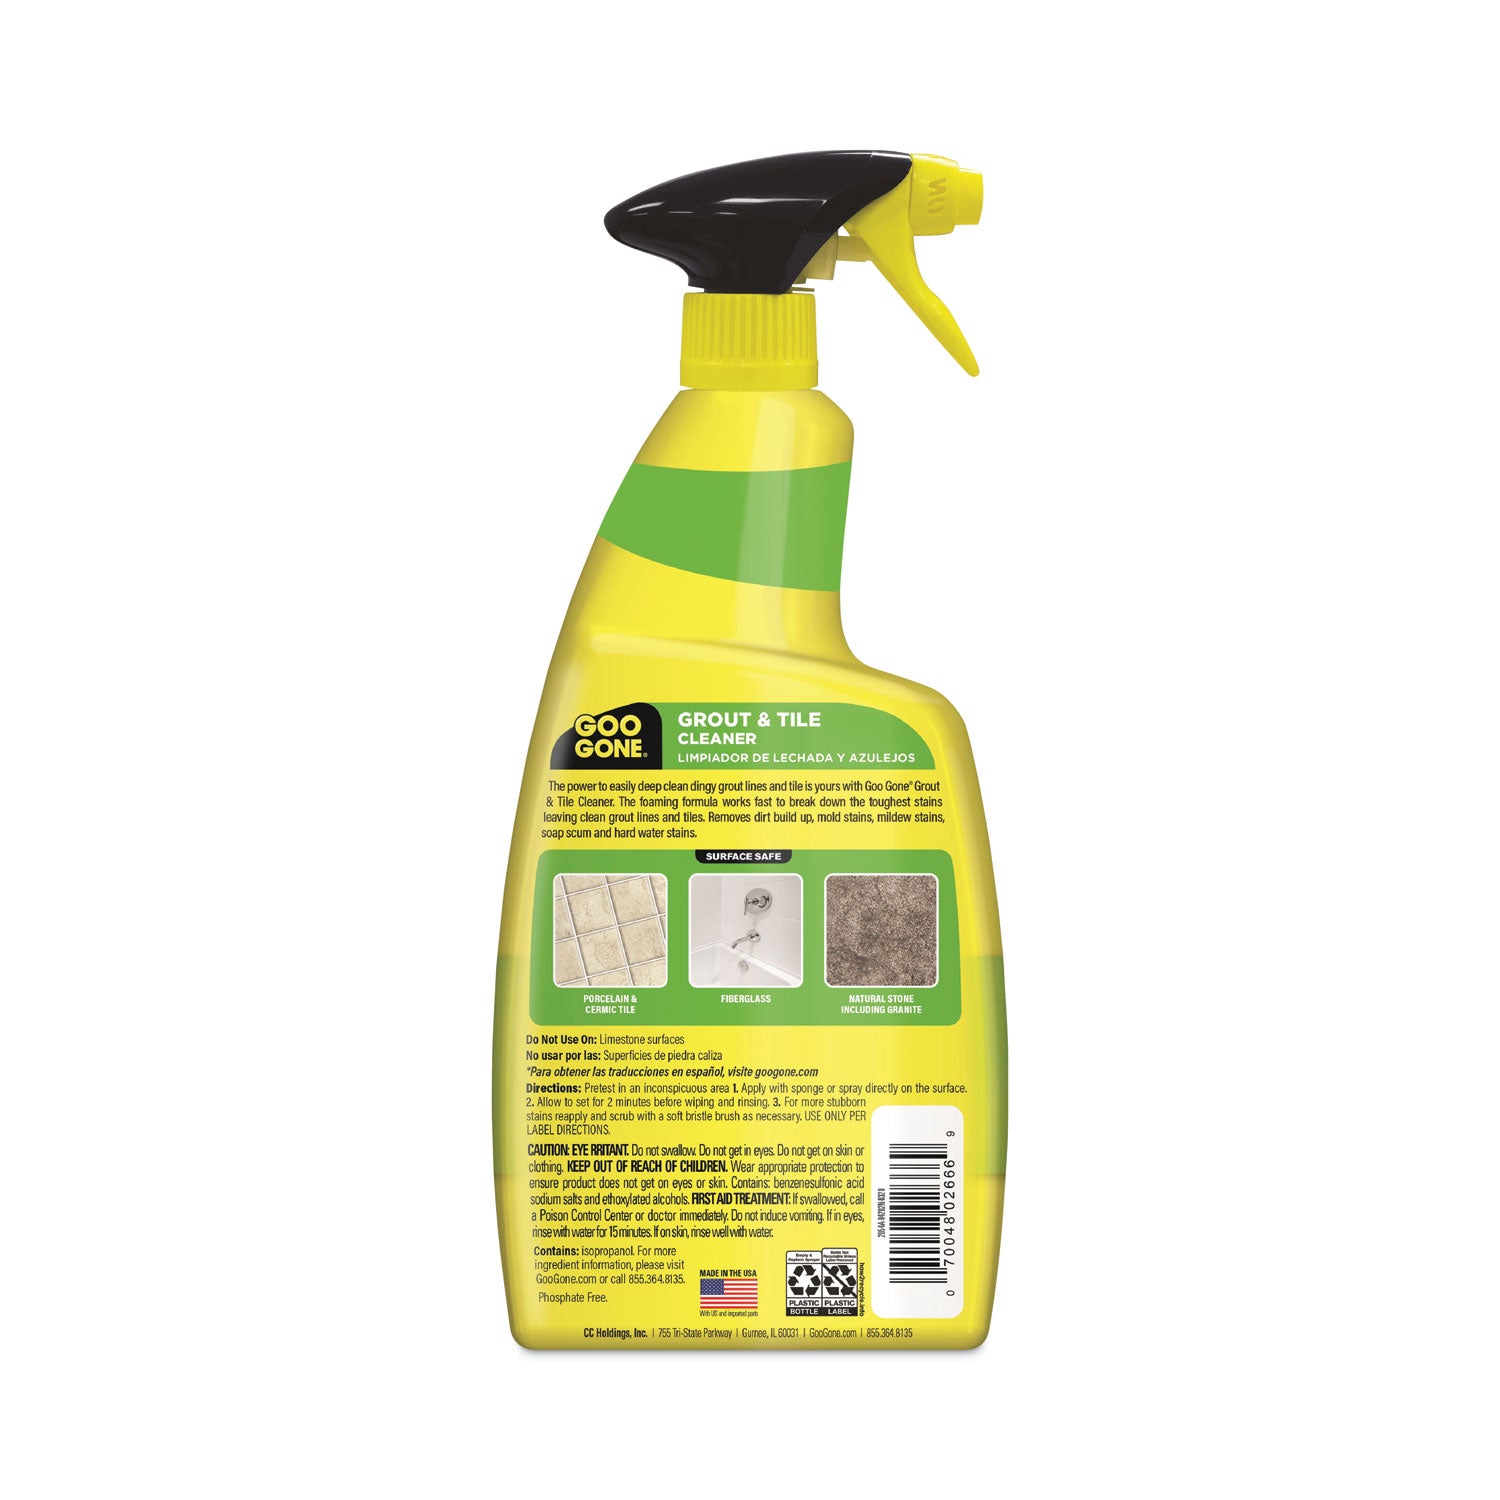 grout-and-tile-cleaner-citrus-scent-28-oz-trigger-spray-bottle-6-ct_wmn2054a - 2